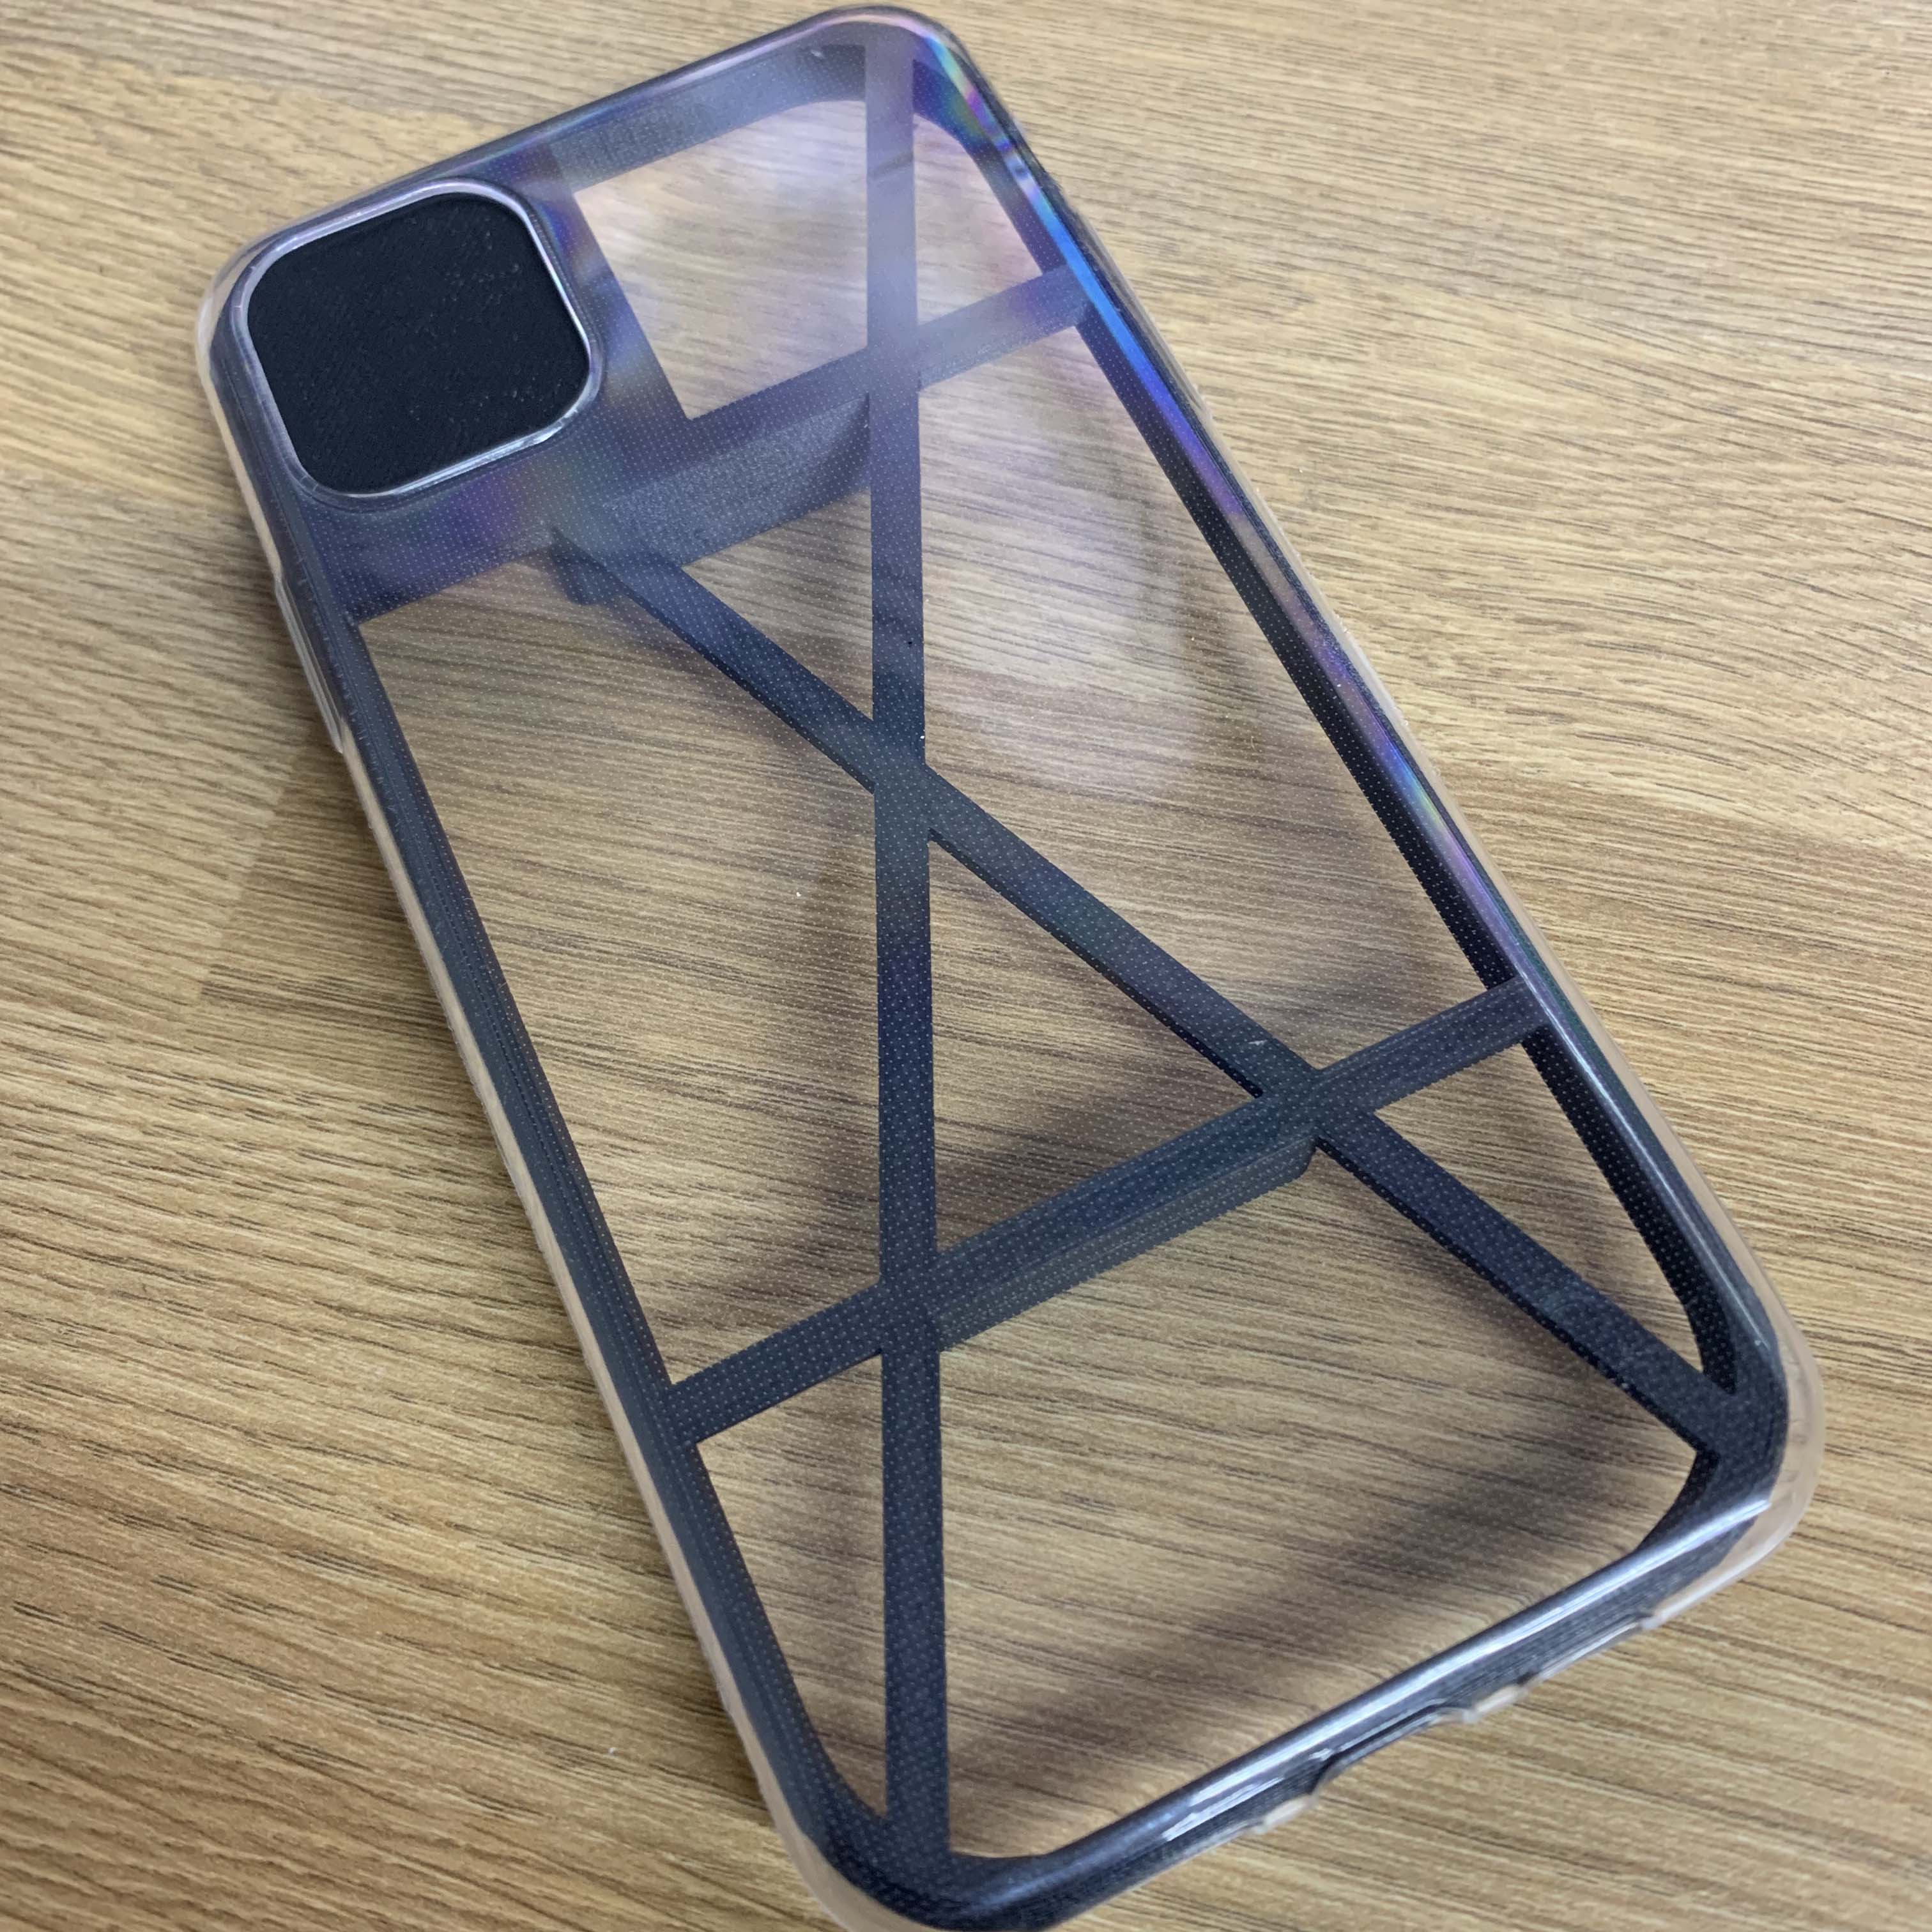 Phone Case Carriers for Printing Phone Cases with Universal Base Plate